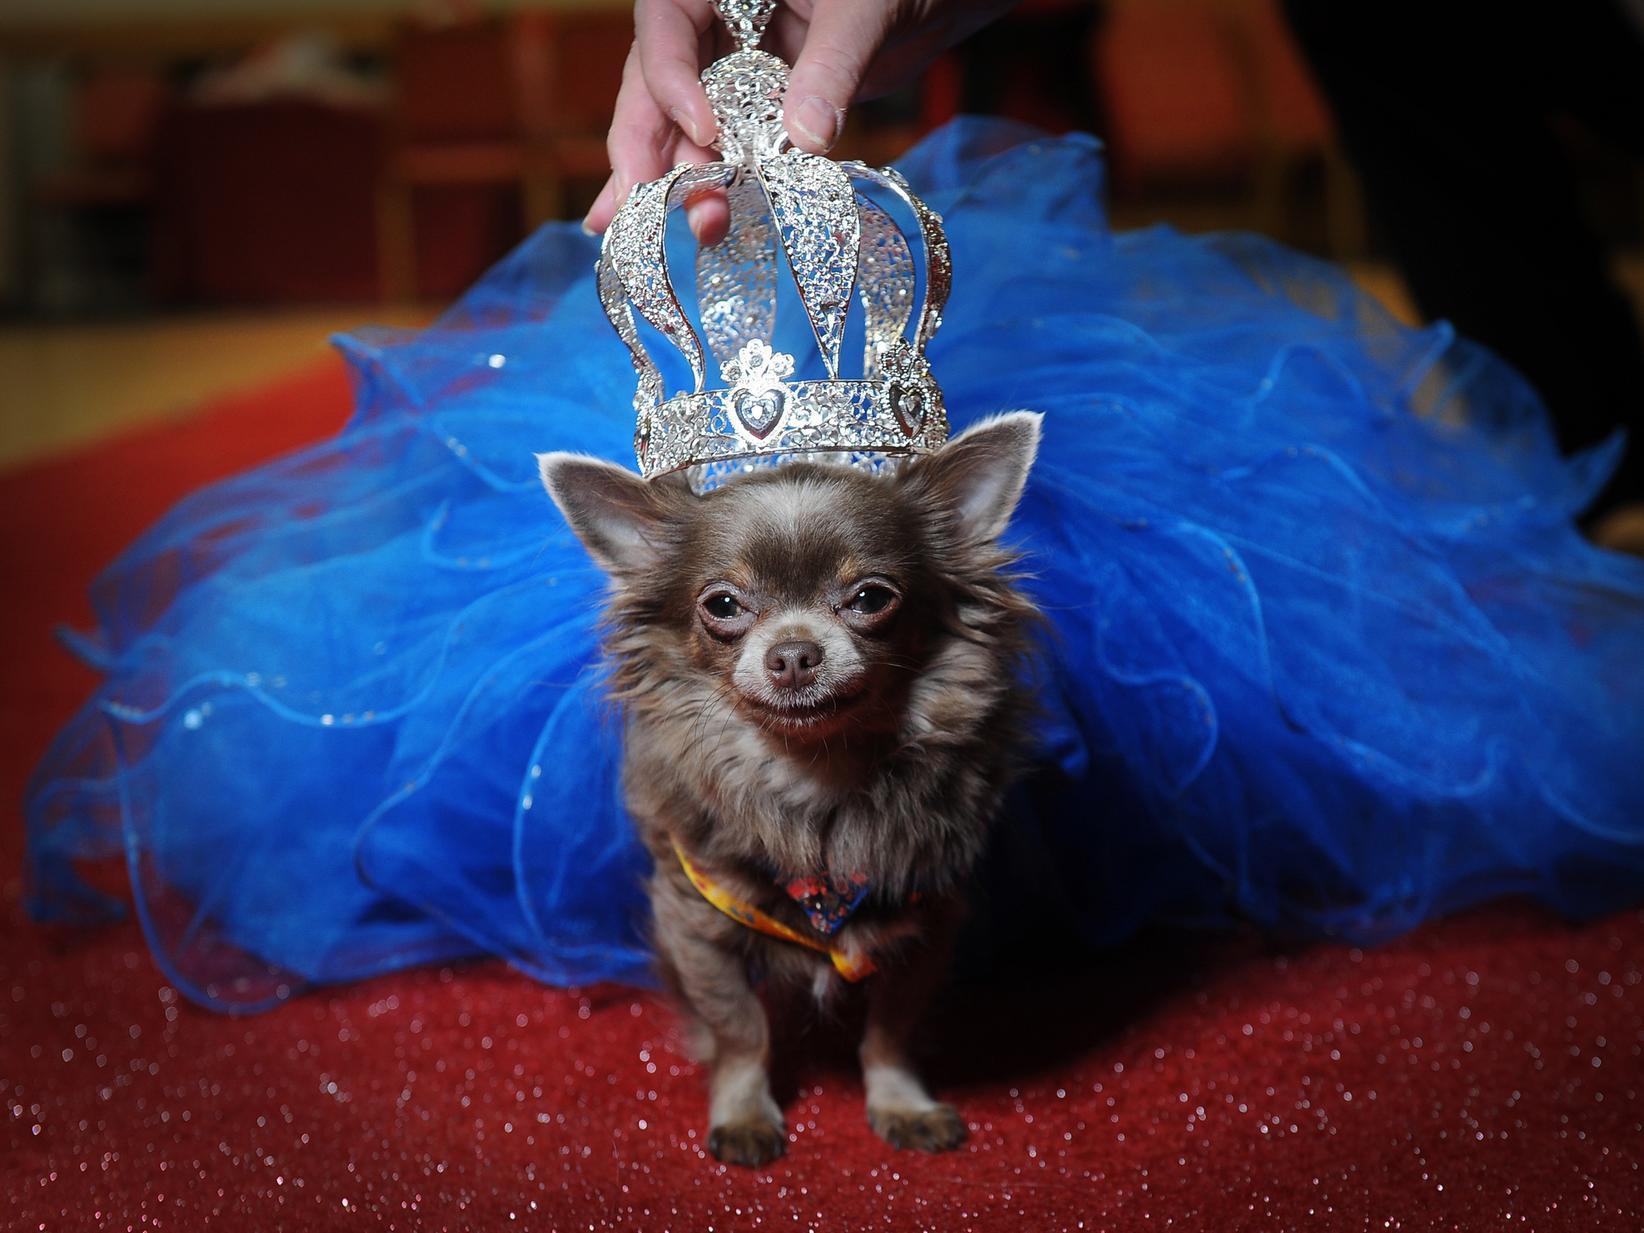 Pageant mascot Genevieve in her fabulous blue ballgown.